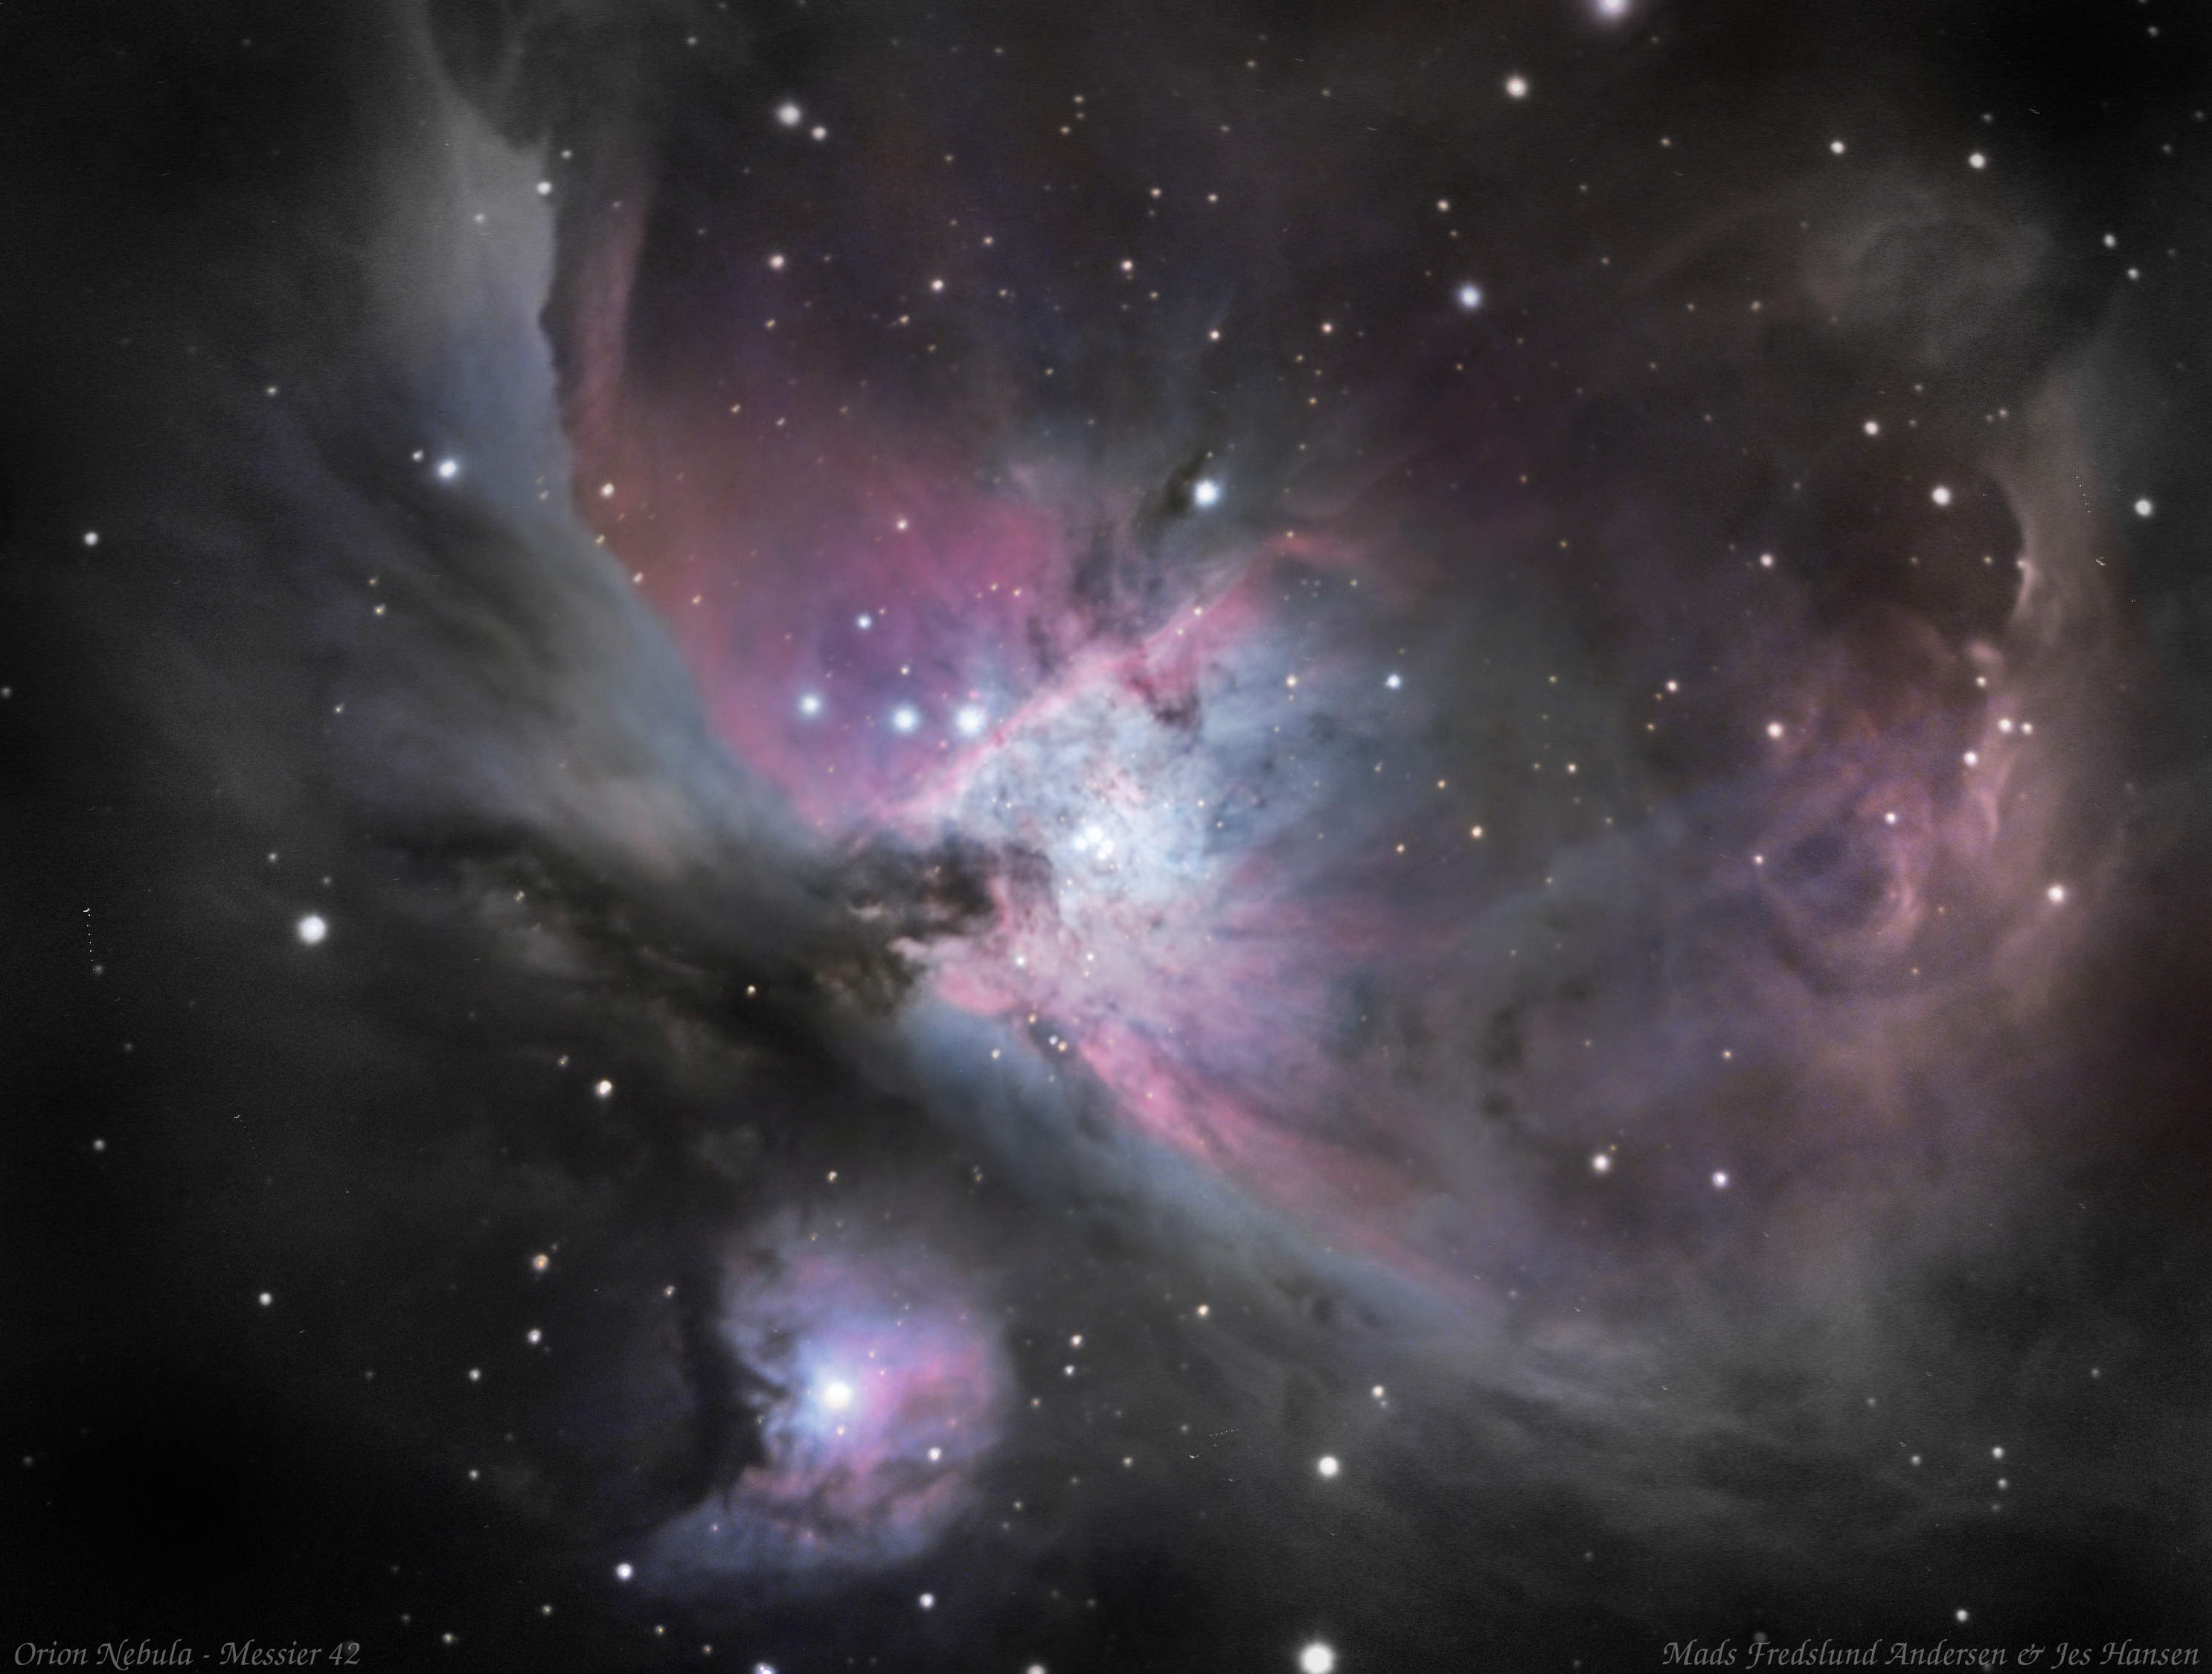 Orion Nebula with SkyCam-2 on SONG telescope. Credit: Mads Fredslund Andersen/SONG/AU